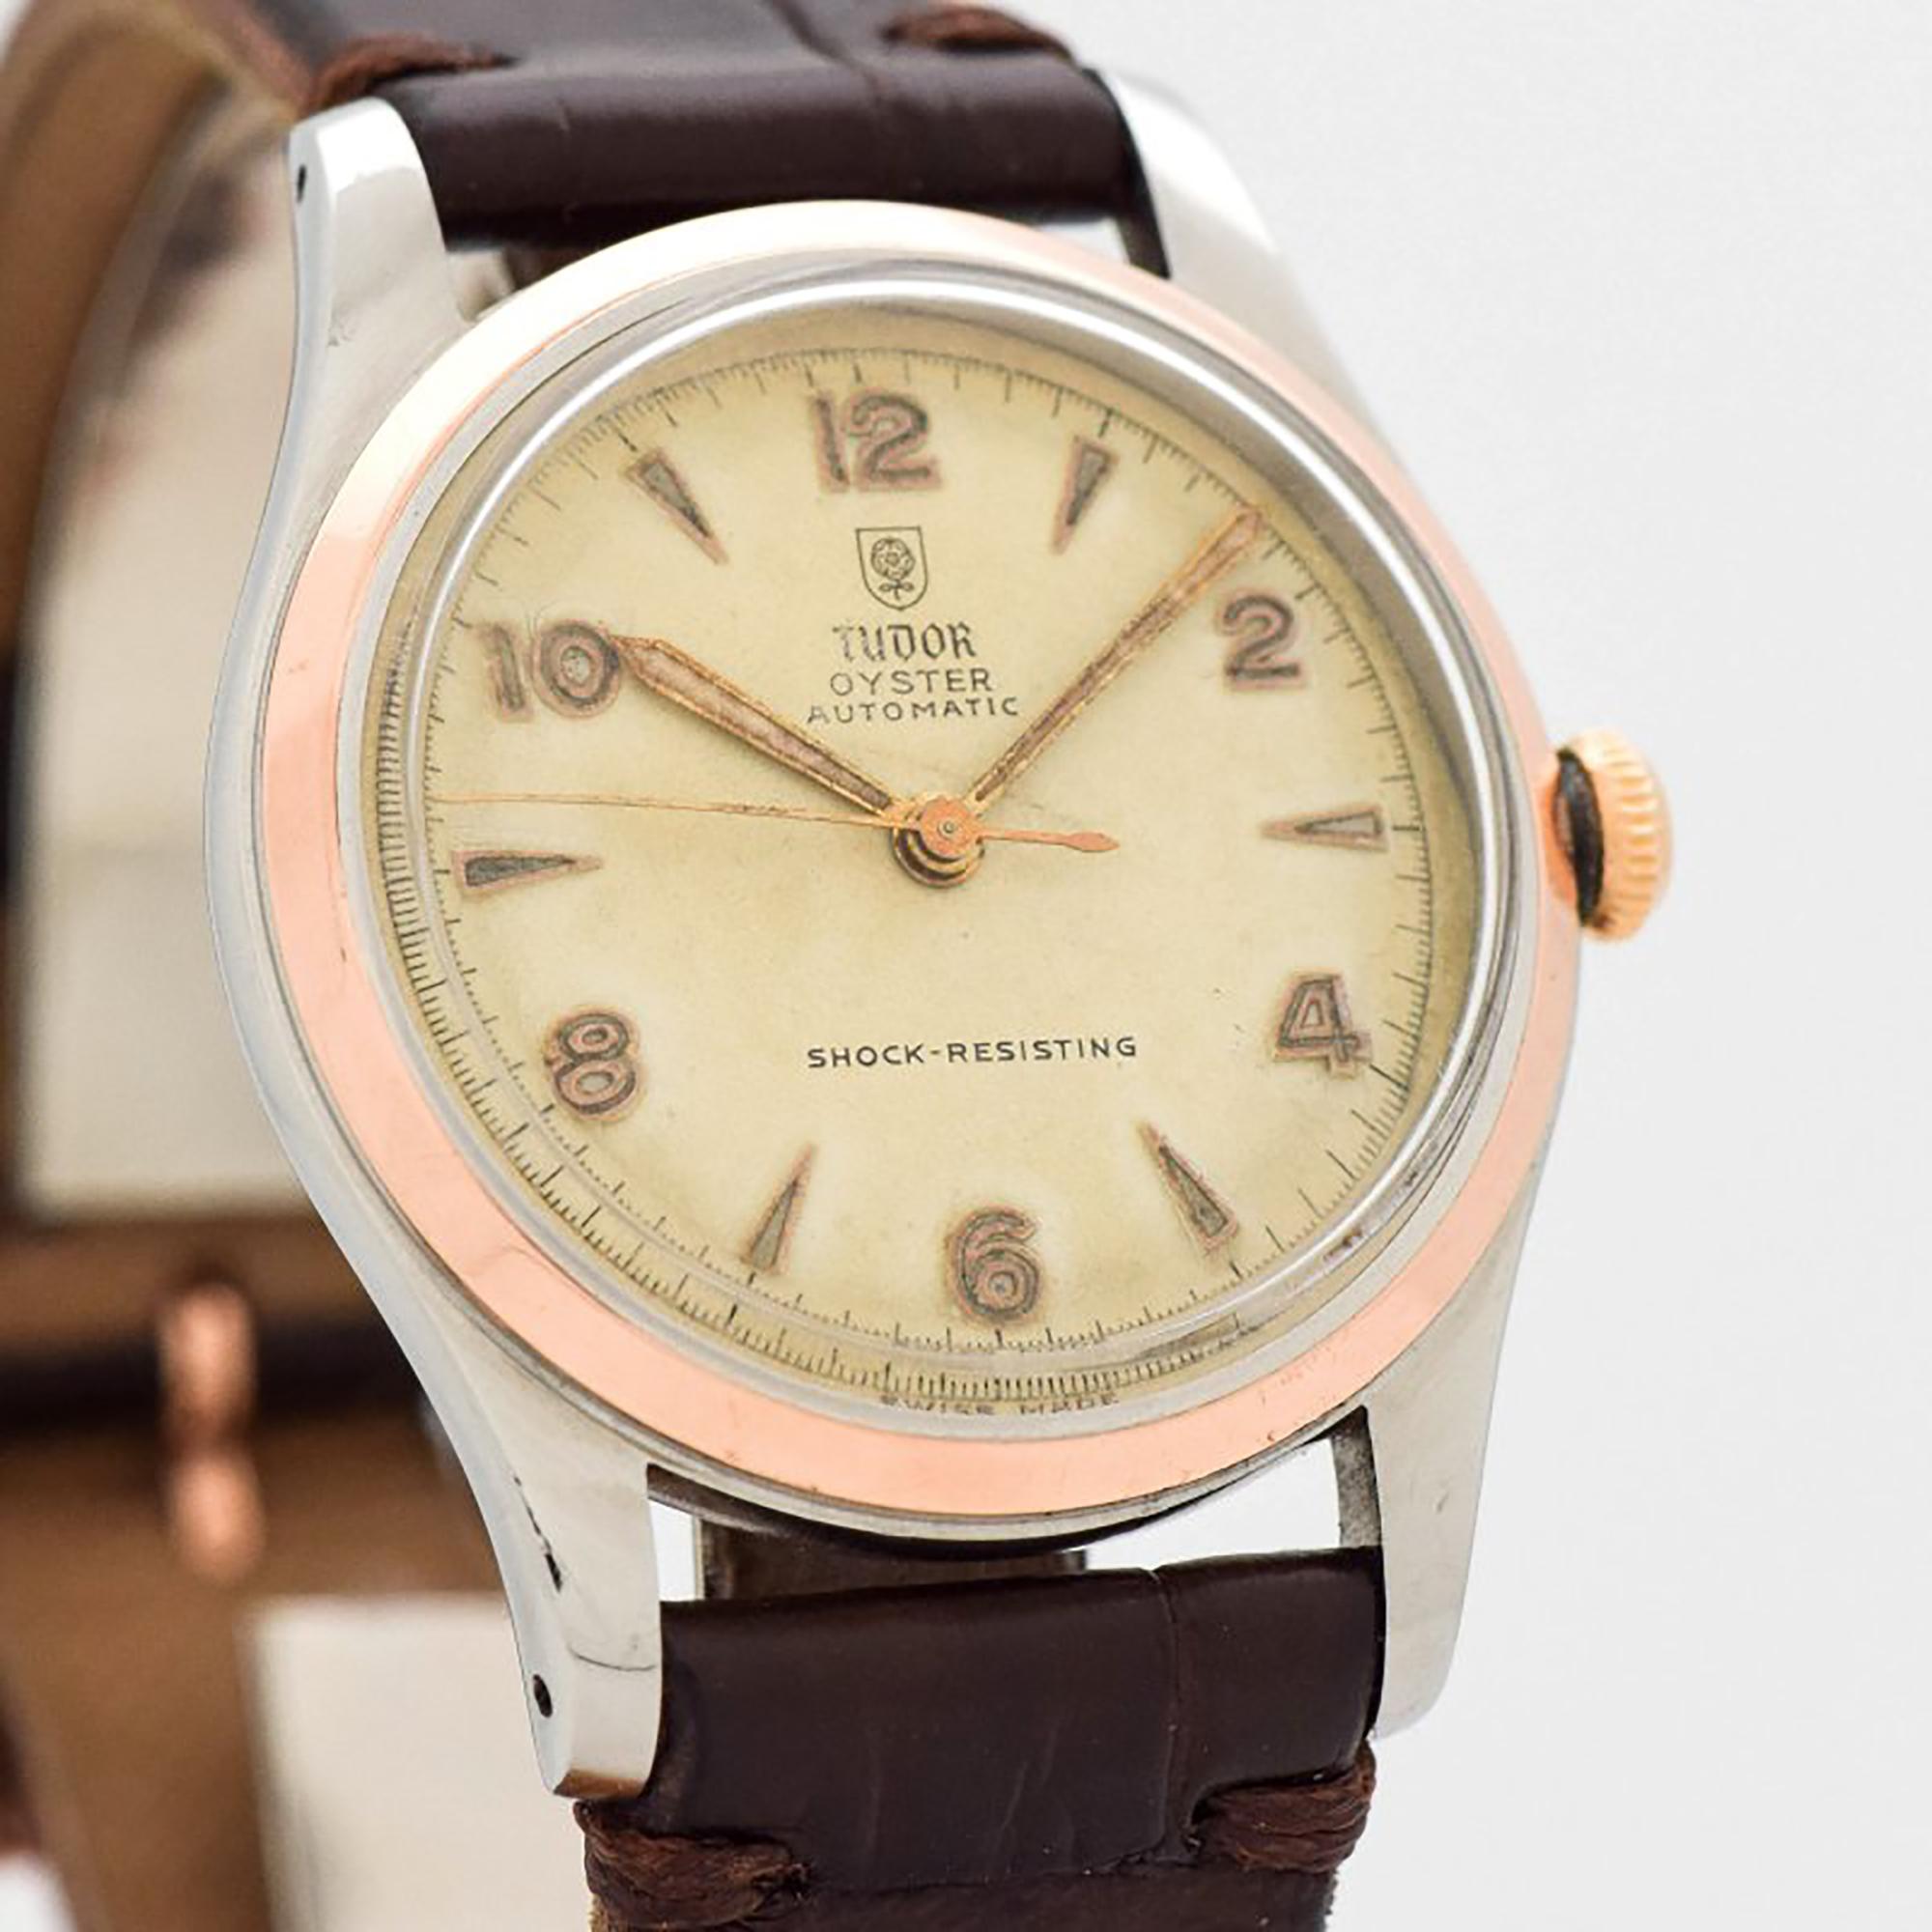 1964 Vintage Tudor by Rolex Oyster Two Tone 14k Rose Gold Bezel and Stainless Steel watch with Original Patina Dial with Applied Framed Luminous Arabic Even Numbers and Elongated Arrow Markers. 34mm x 41mm lug to lug (1.34 in. x 1.61 in.) - Powered